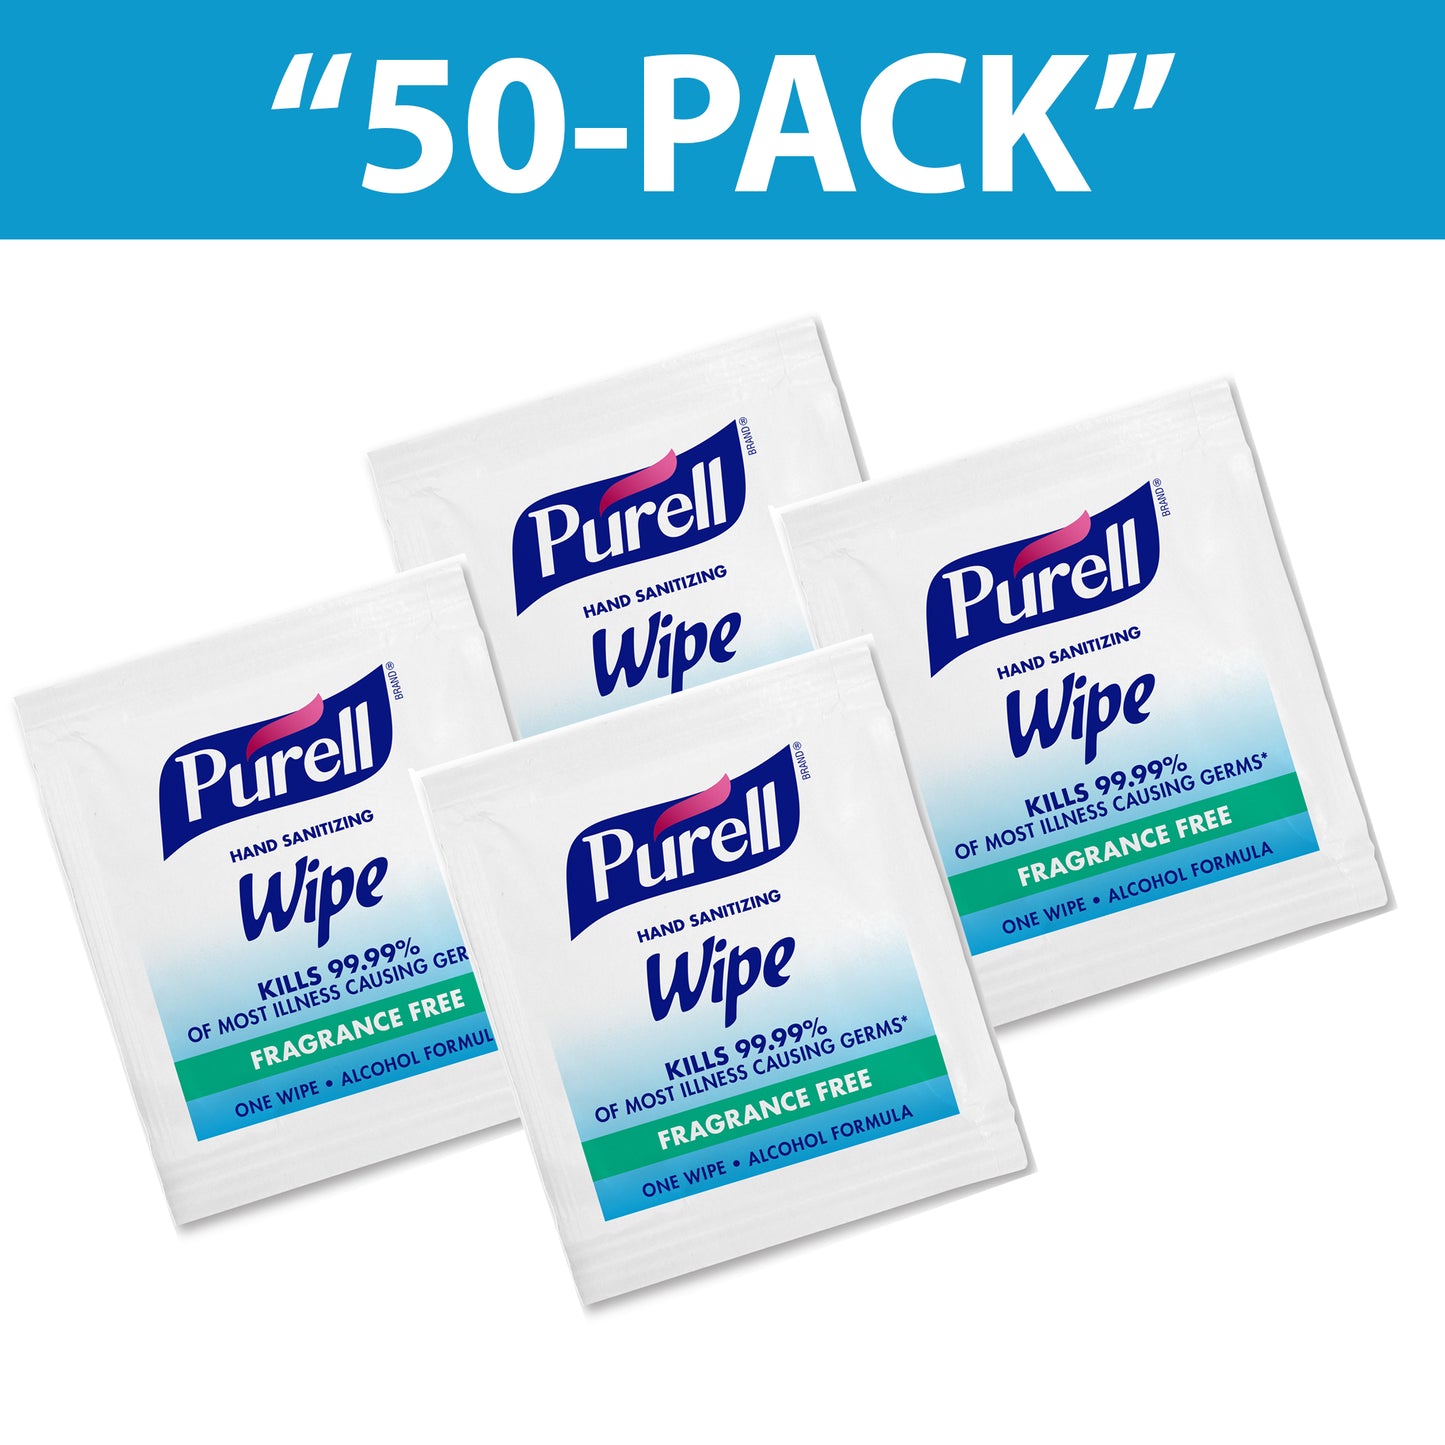 Purell Hand Sanitizer Wipes (50-PACK)